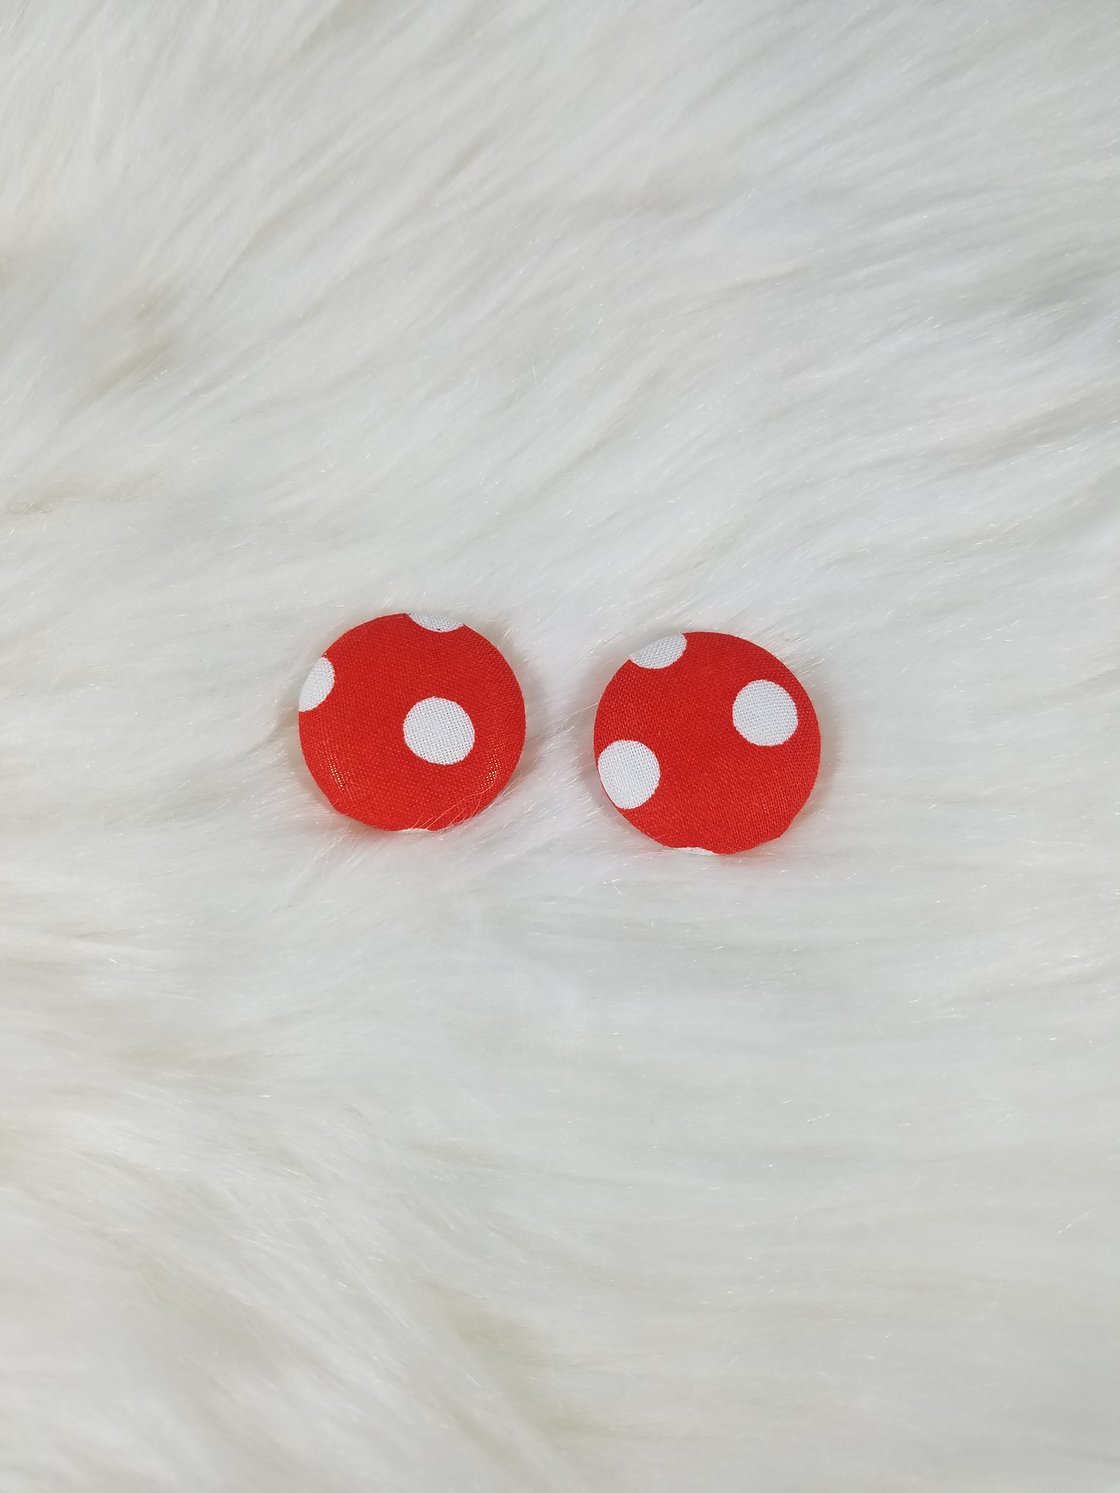 Image of Red & White Polka-dot Button Earrings